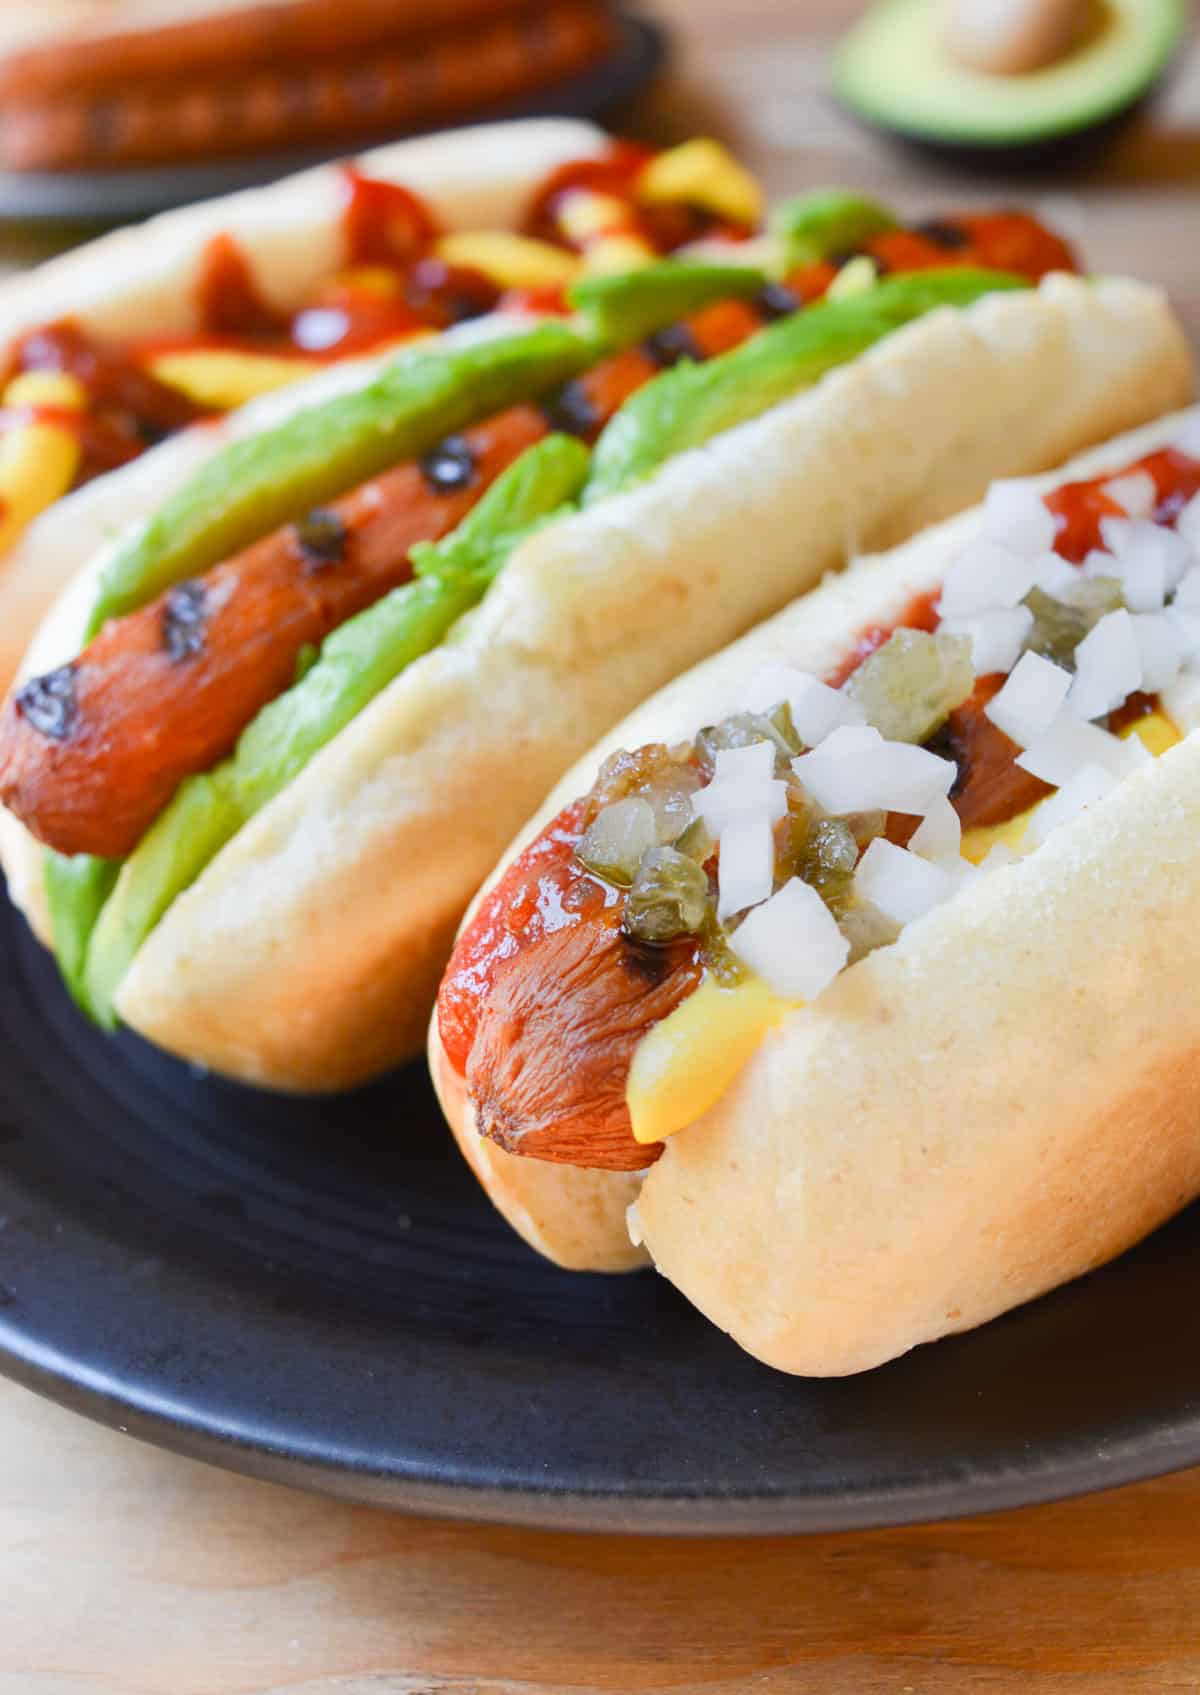 Three carrot hotdogs in buns with toppings.